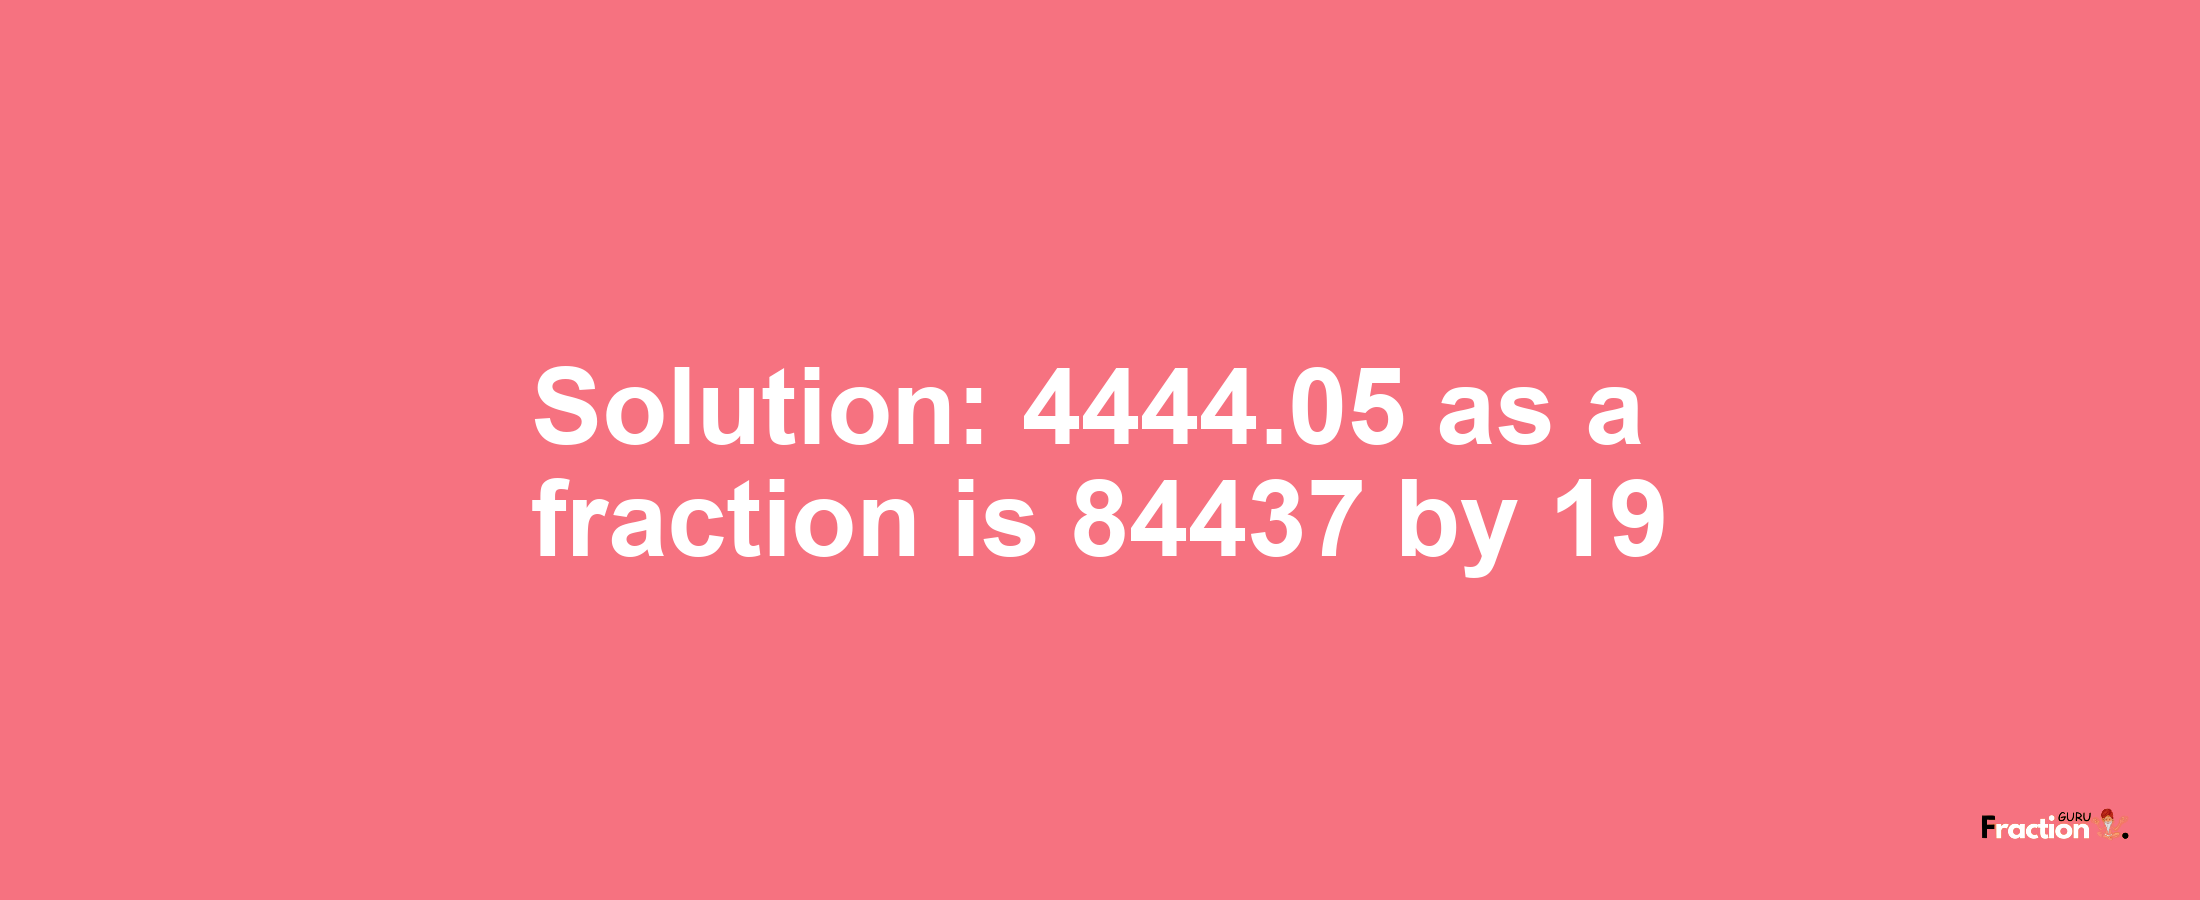 Solution:4444.05 as a fraction is 84437/19